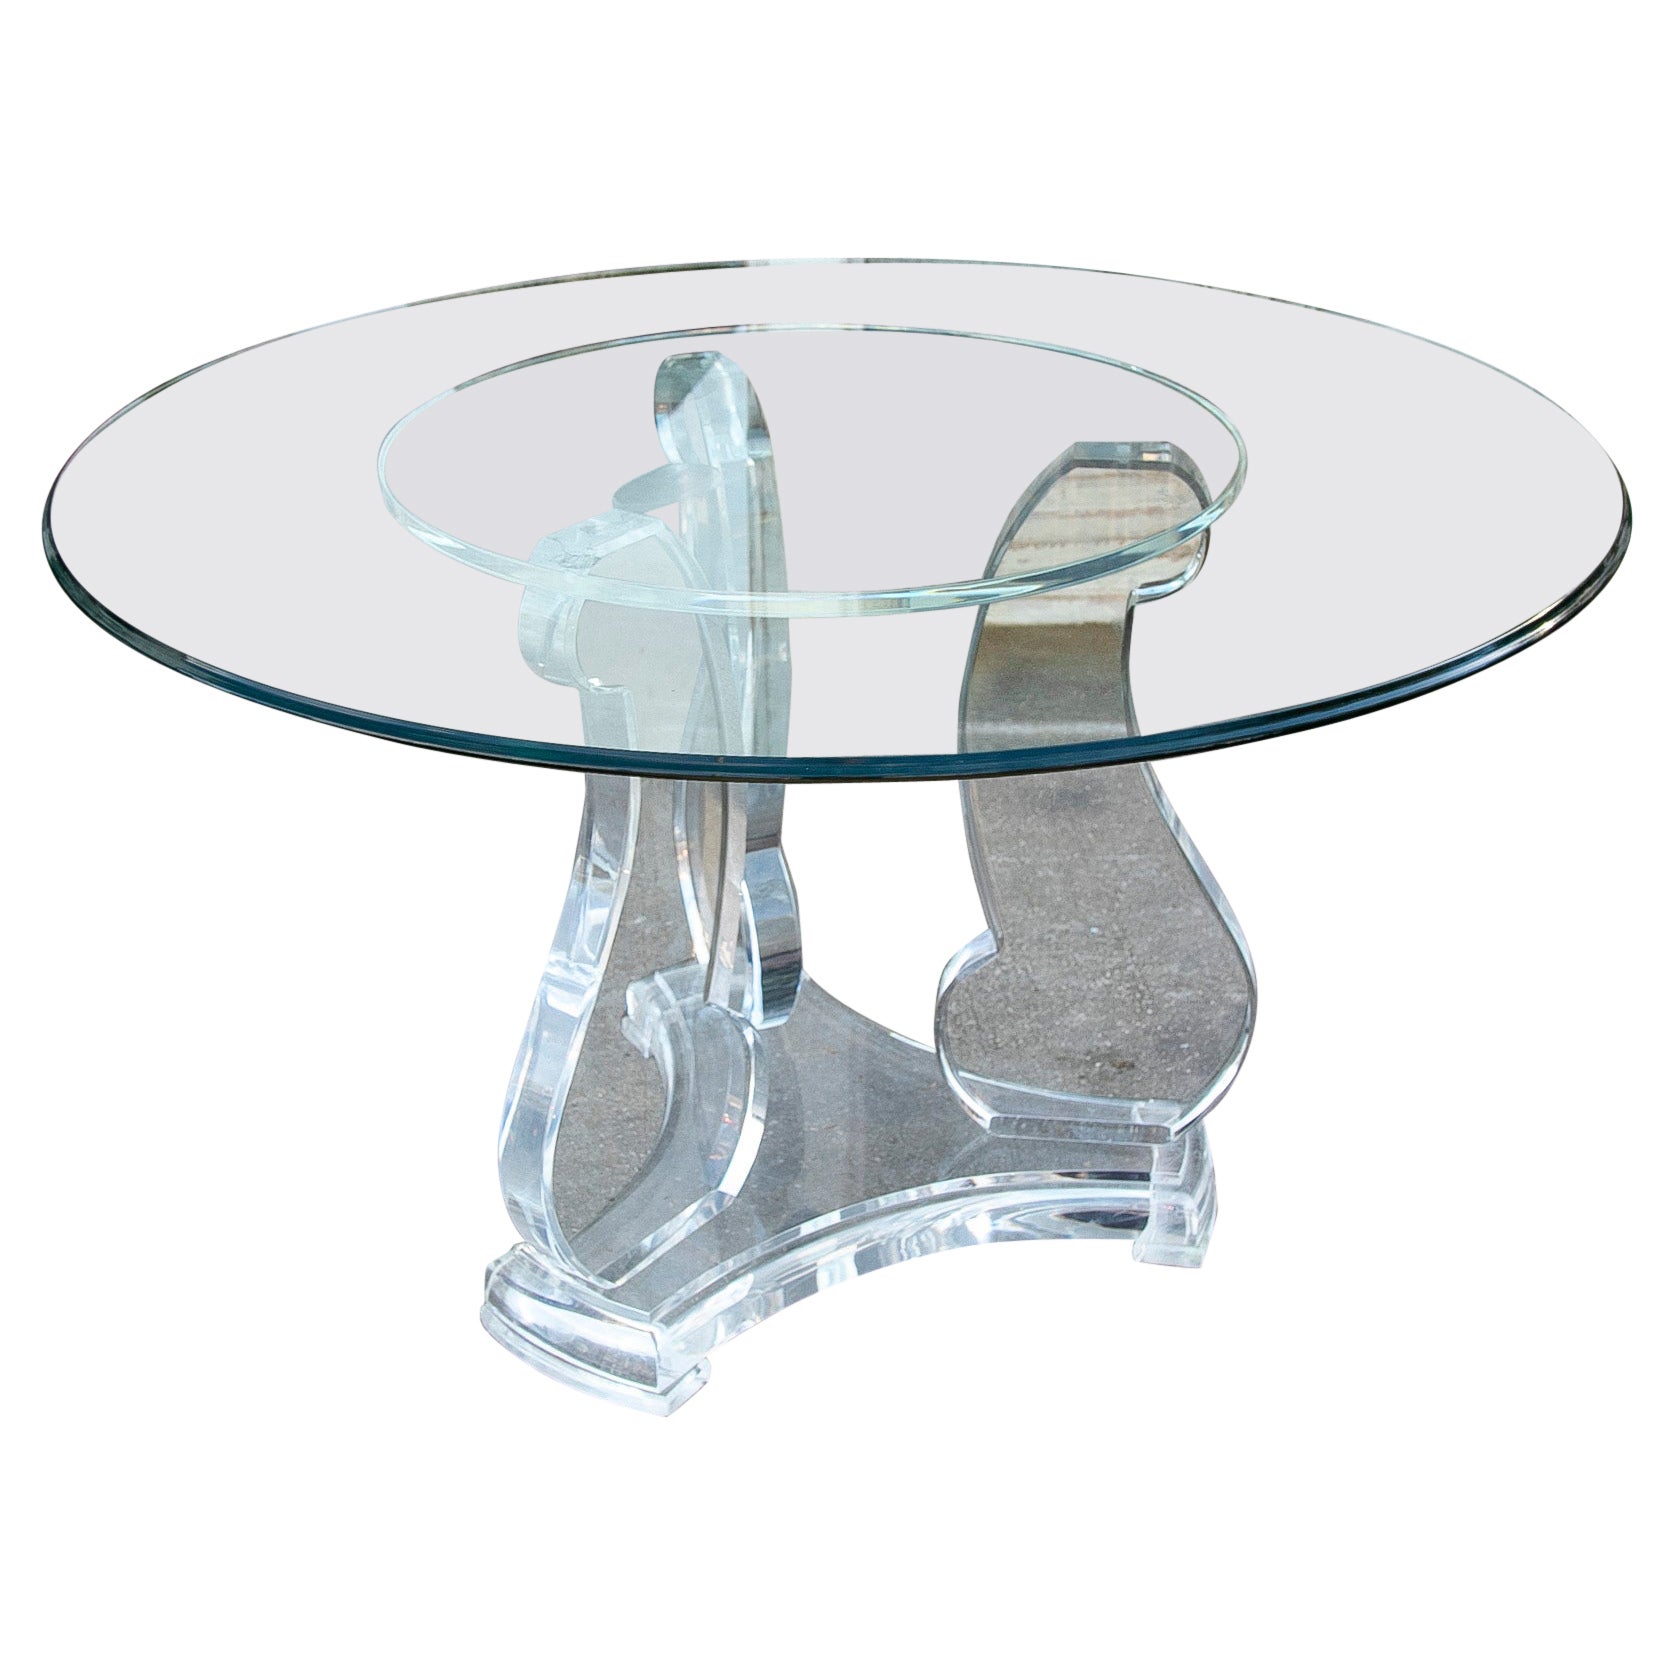 1970s Round Table with Metraquilato Base and Reinforced Glass Top  For Sale